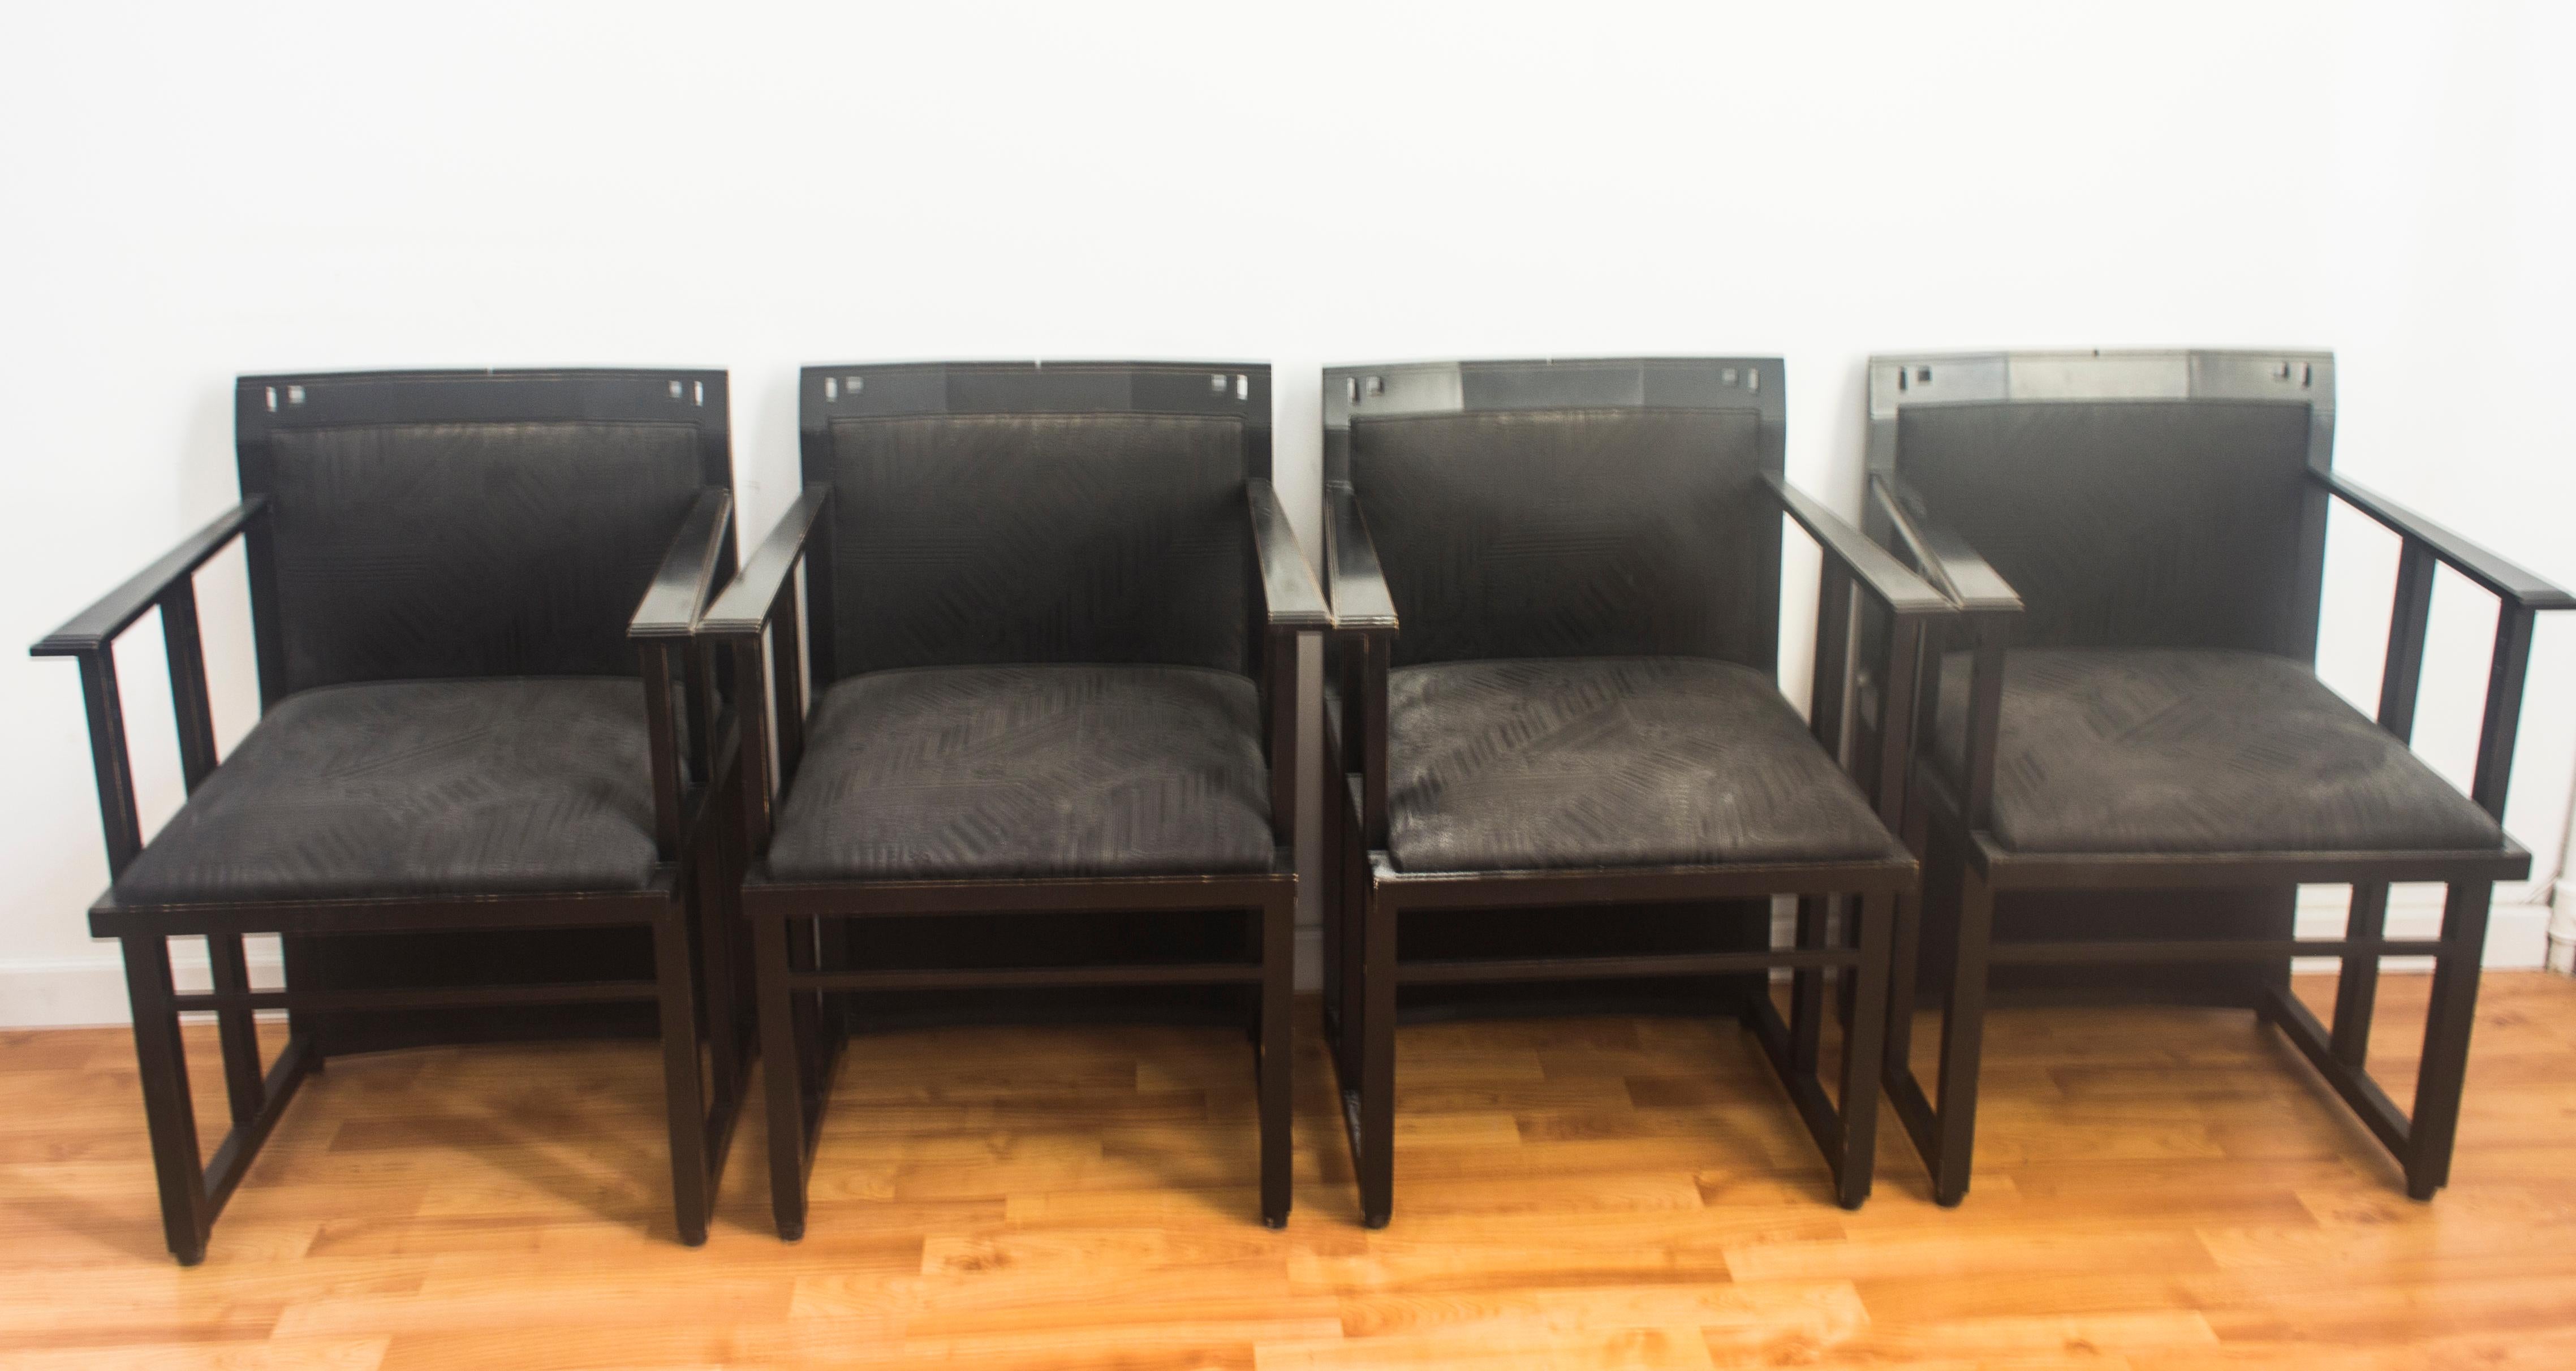 Introducing our rare set of 4 Giorgetti chairs, designed in the mid-'80s by Umberto Asnago and called 'Galaxy'. These chairs have a strong Charles Rennie Mackintosh feel, with their clean lines and geometric shapes, but also incorporate the iconic